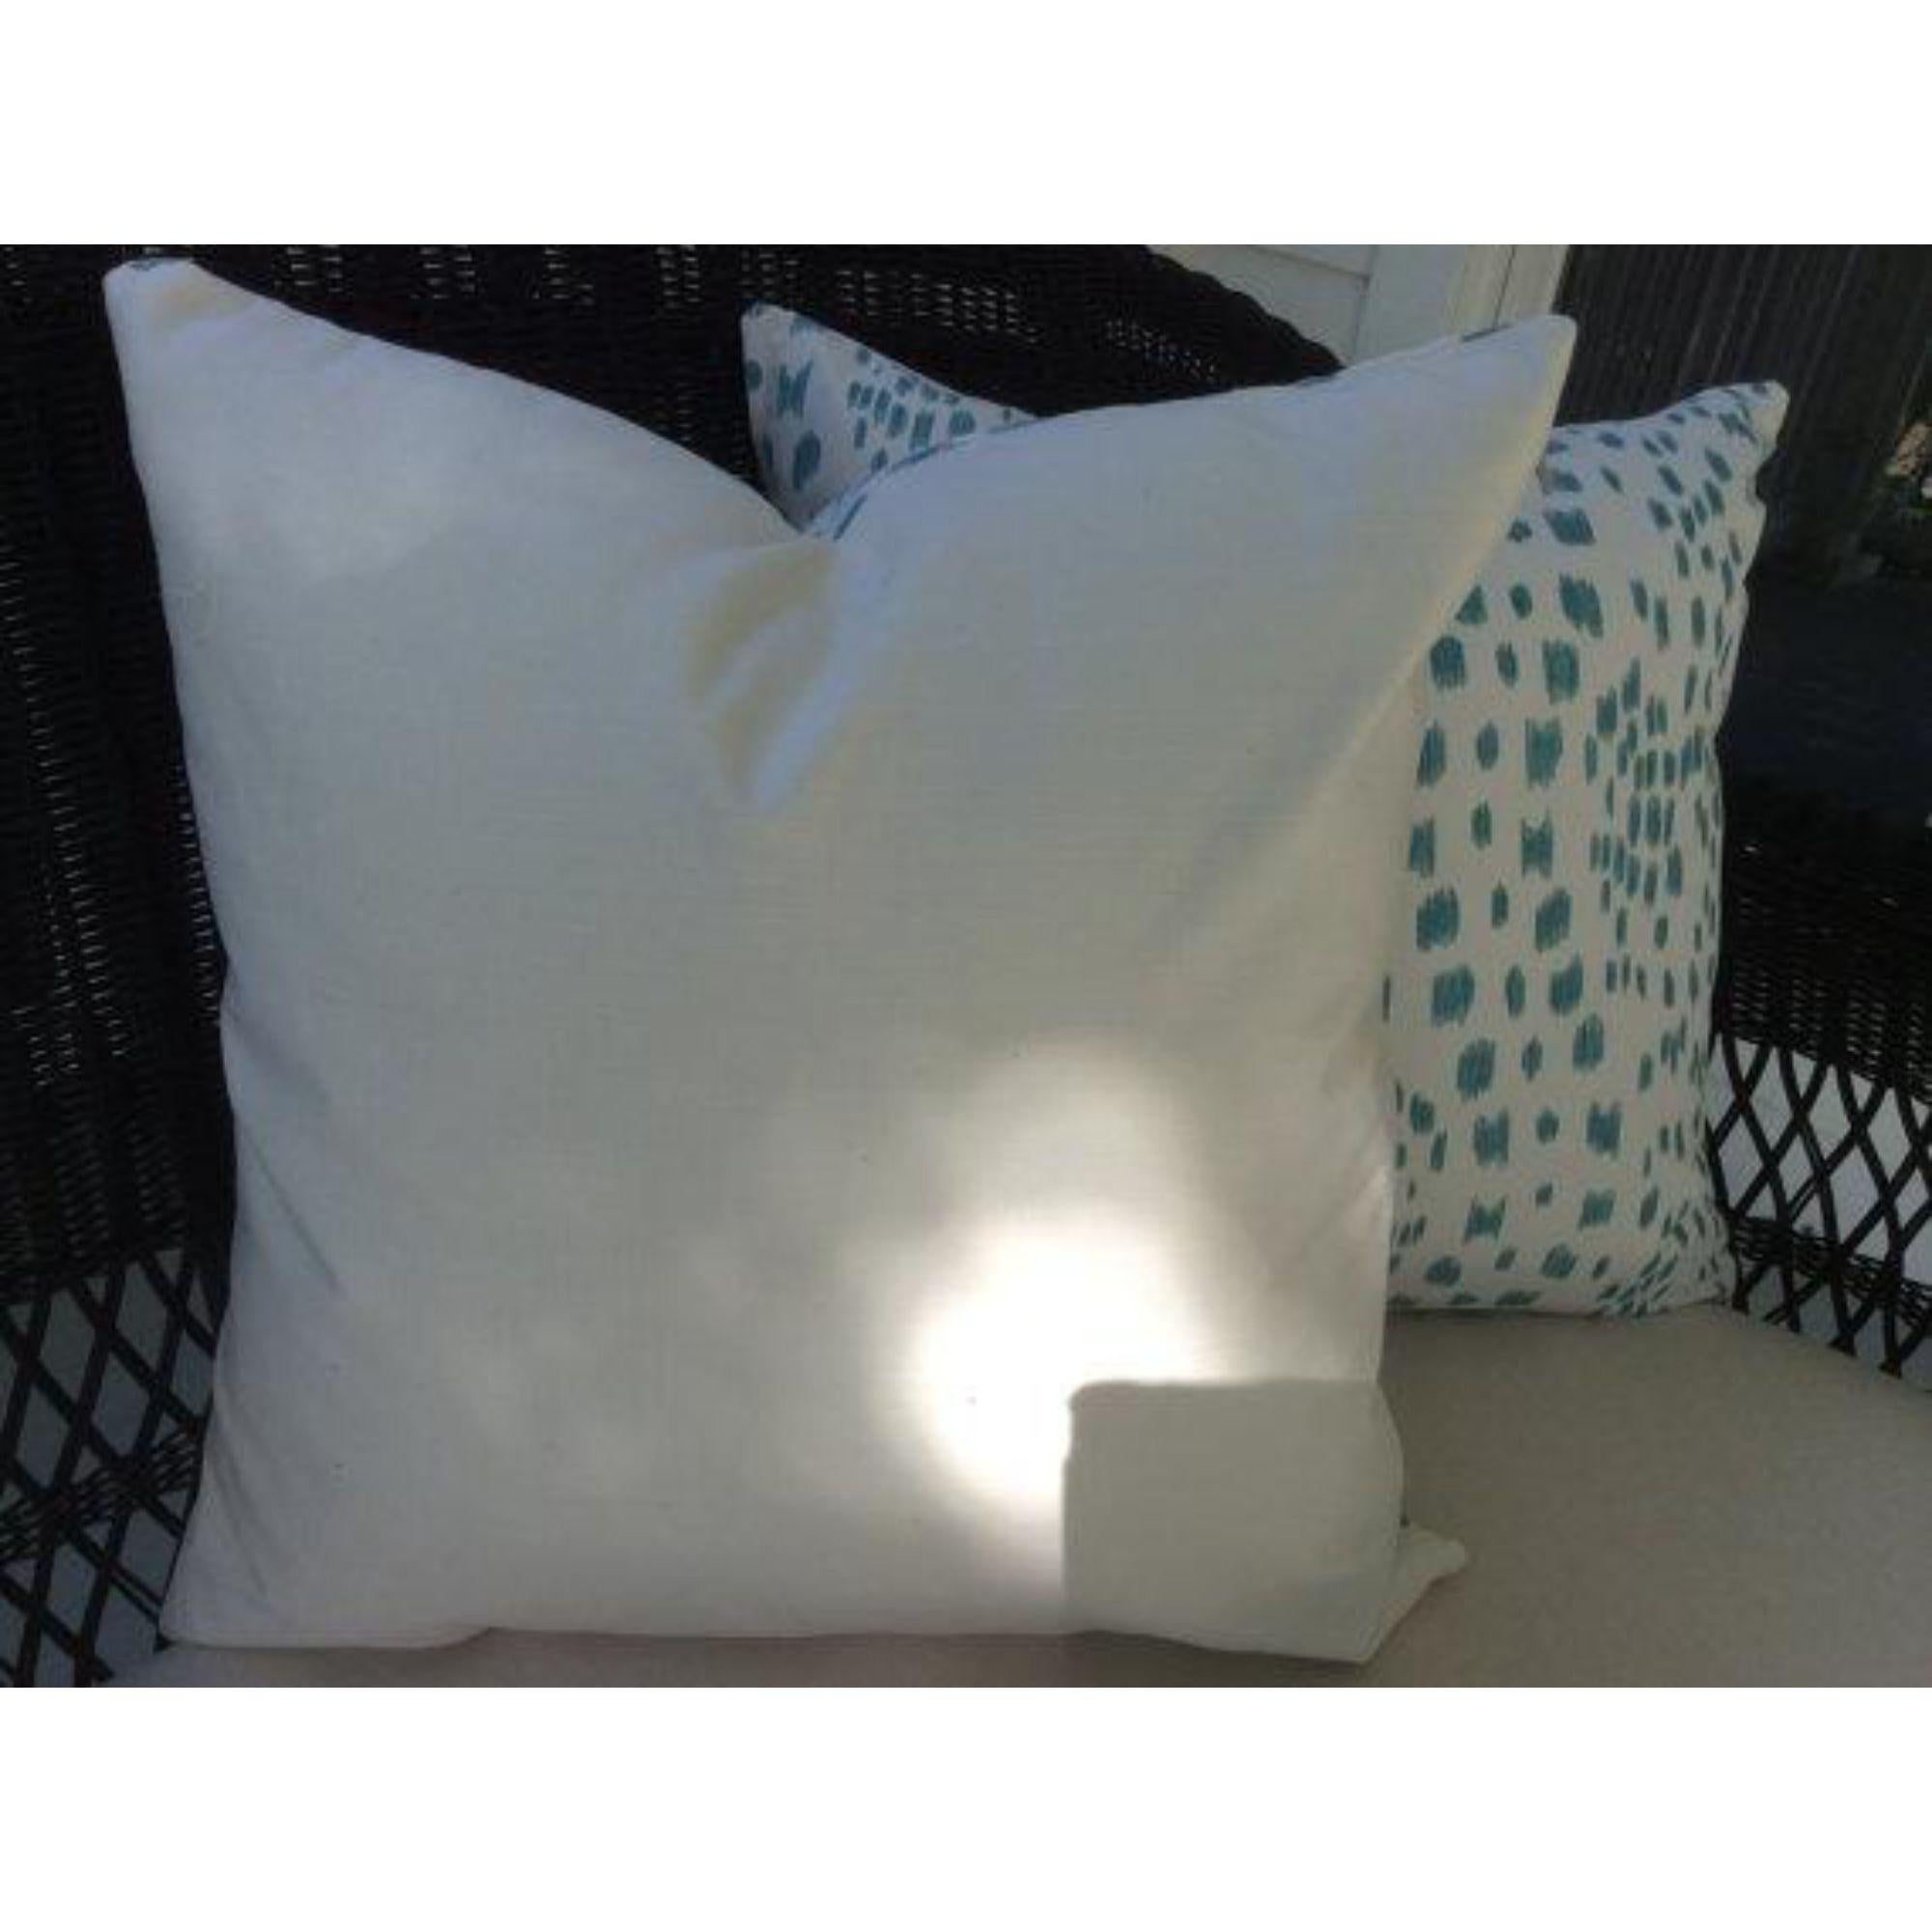 American Brunschwig & Fils Pillows in Les Touches Aqua and Cream Cotton - a Pair For Sale